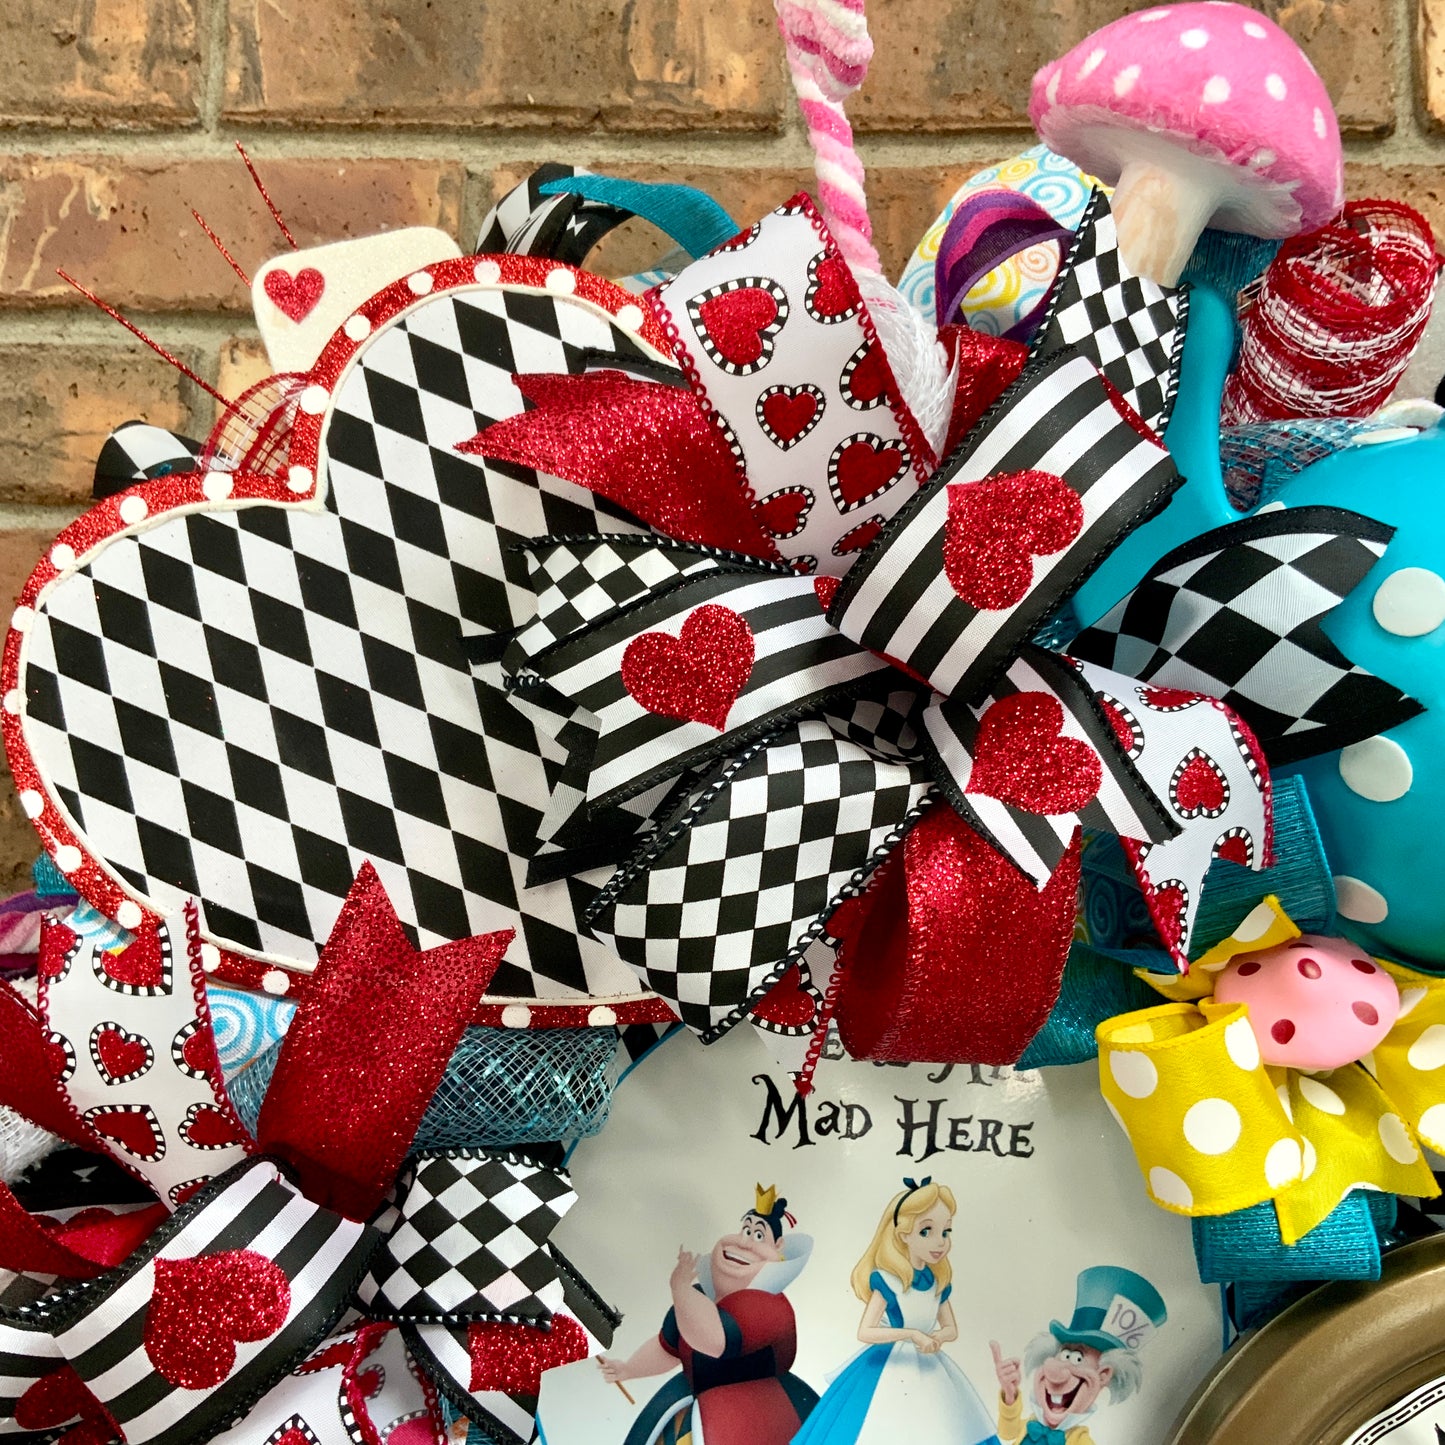 Alice In Wonderland Wreath, Cheshire Cat Wreath, We Are All Mad Here, Mad Hatter Wreath, Cheshire Cat Decor, Alice In Wonderland Decor, Queen Of Hearts Decor